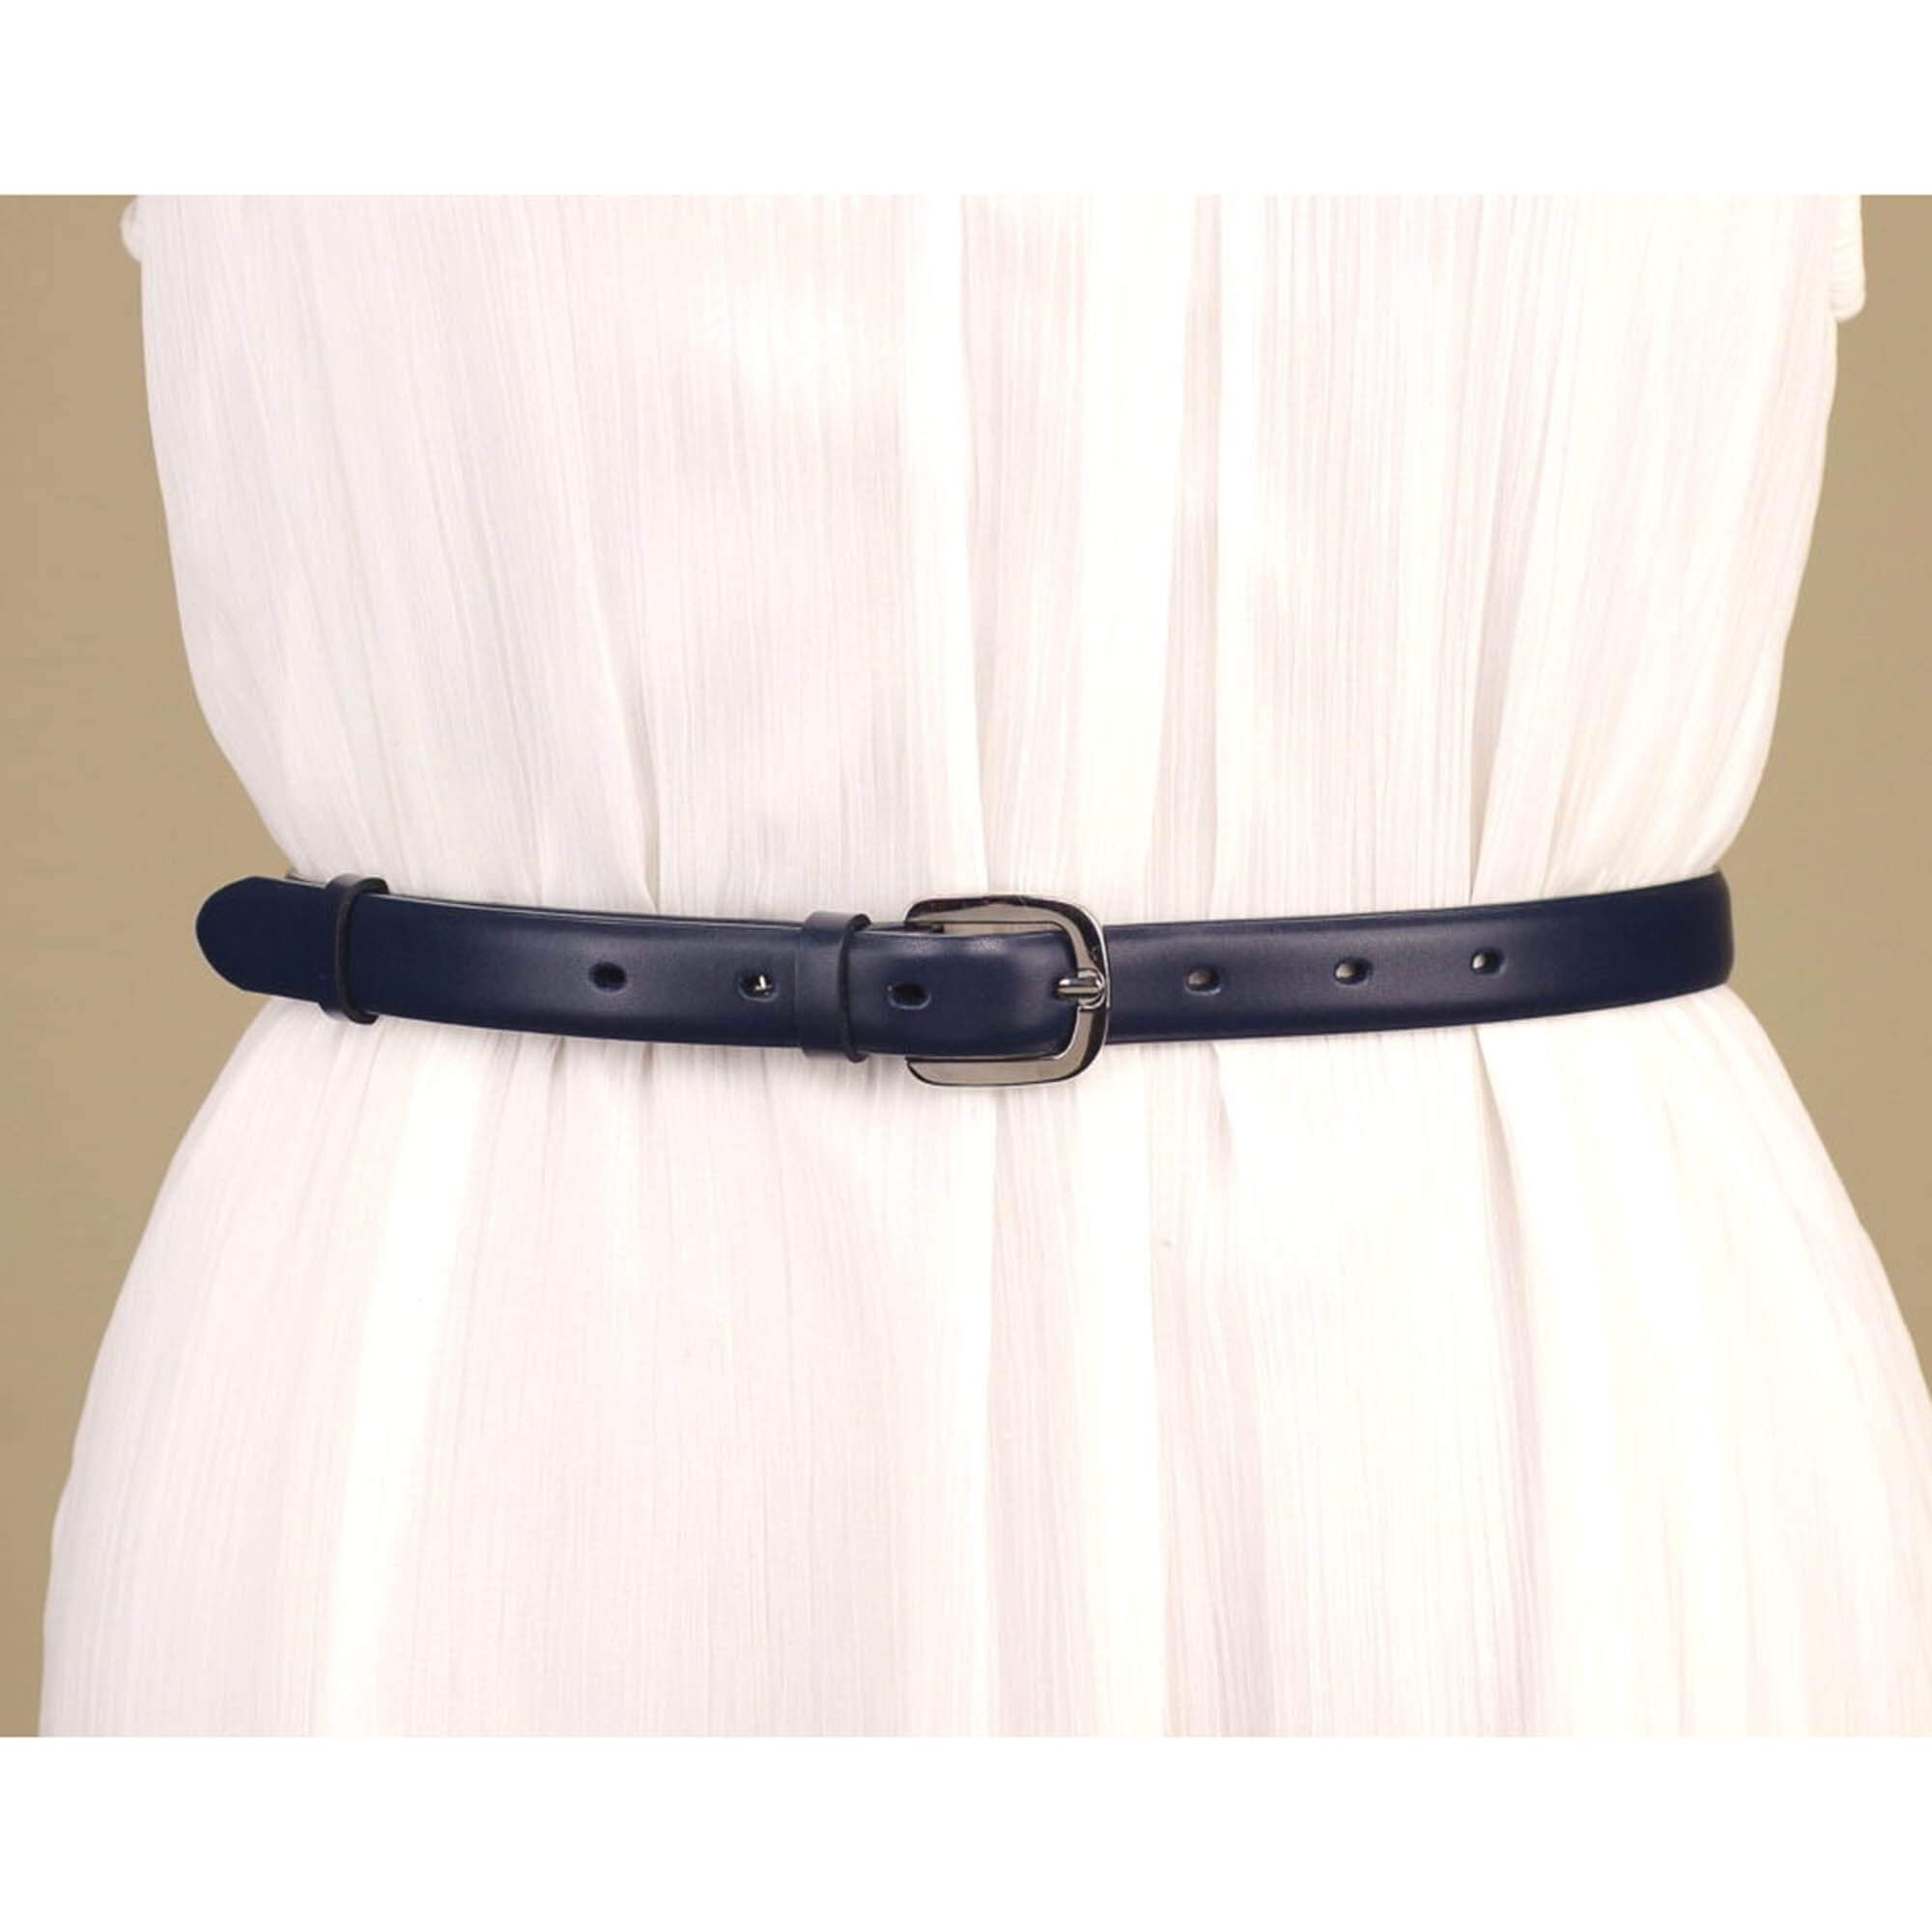 Buy Thin Lady Navy Blue Leather Belt For Dress | LeatherBelts